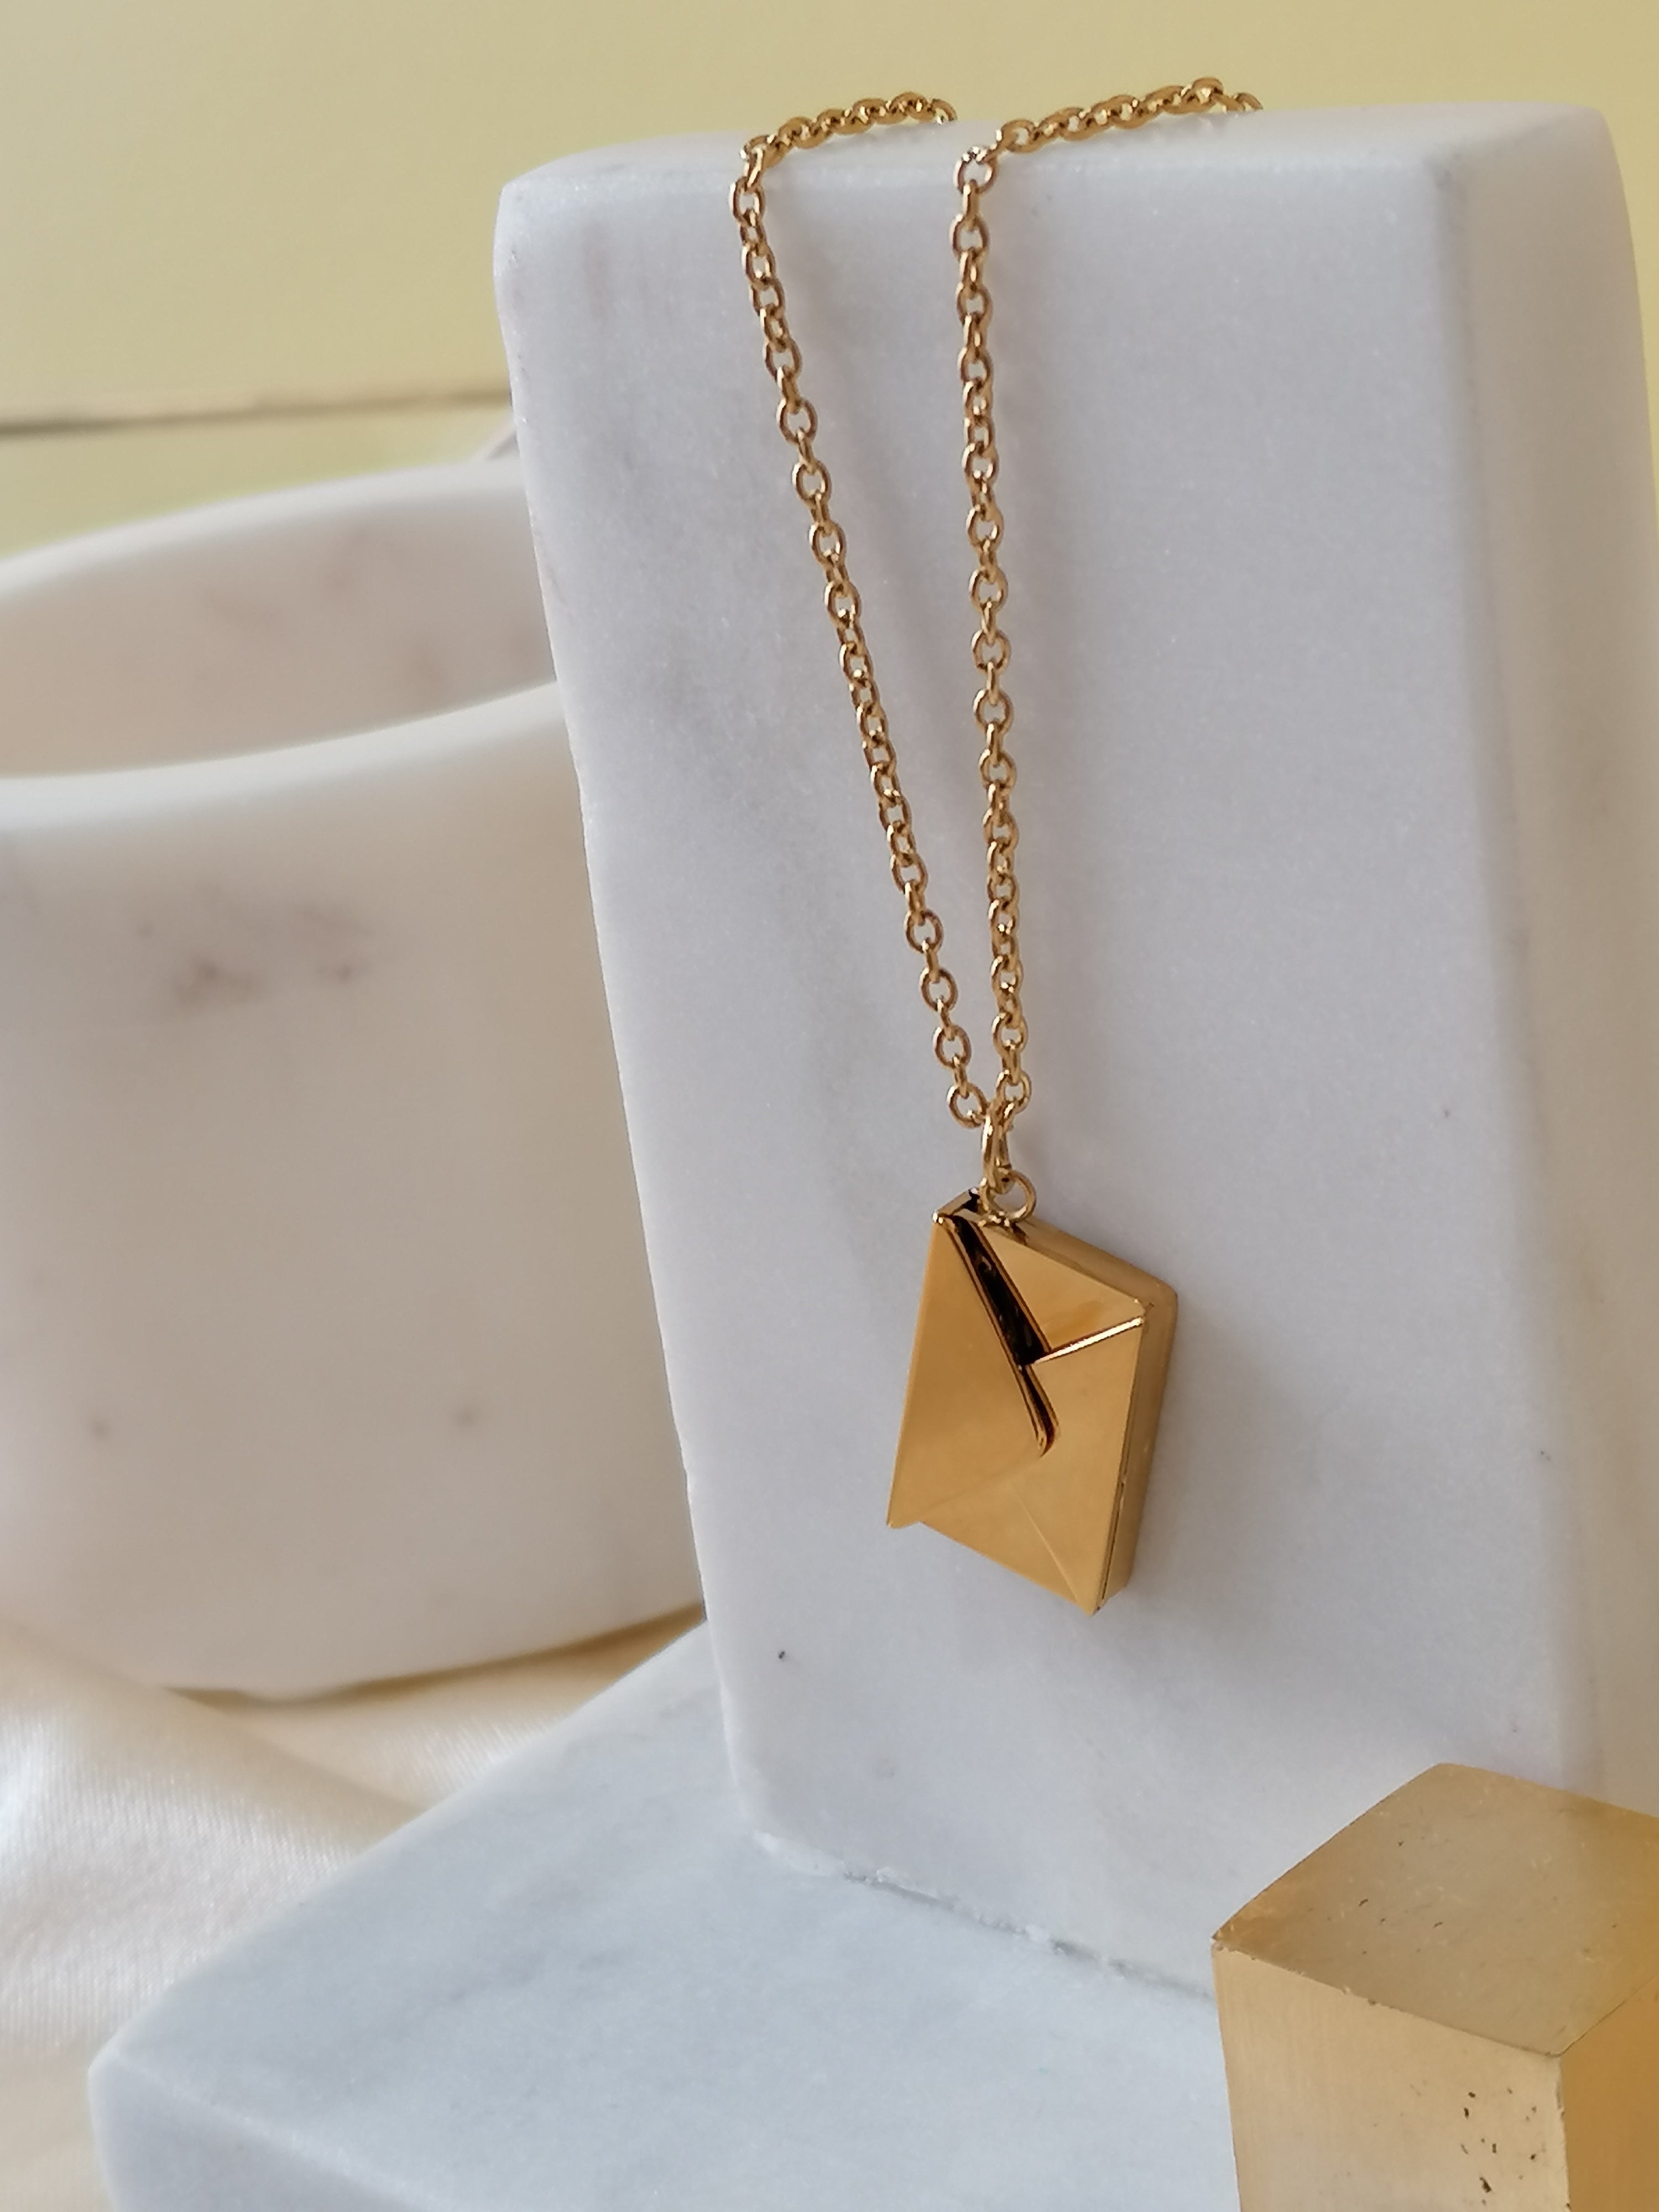 Personalized Envelope Pendant Chain - Just Lil Things at Rs 999.00,  Bengaluru | ID: 2851026342288